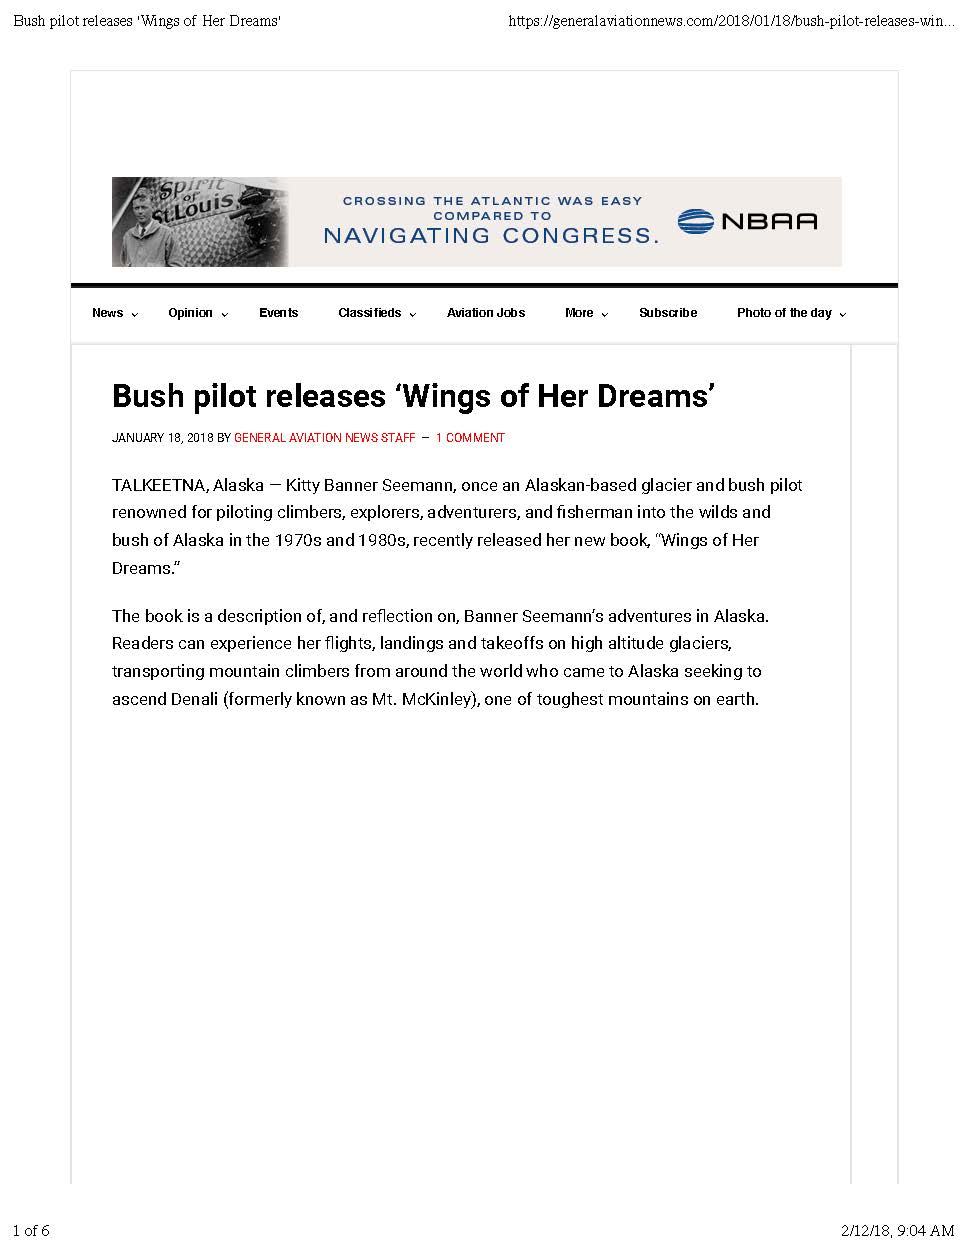 General Aviation News Bush pilot releases 'Wings of Her Dreams' 1.18.18_Page_1.jpg